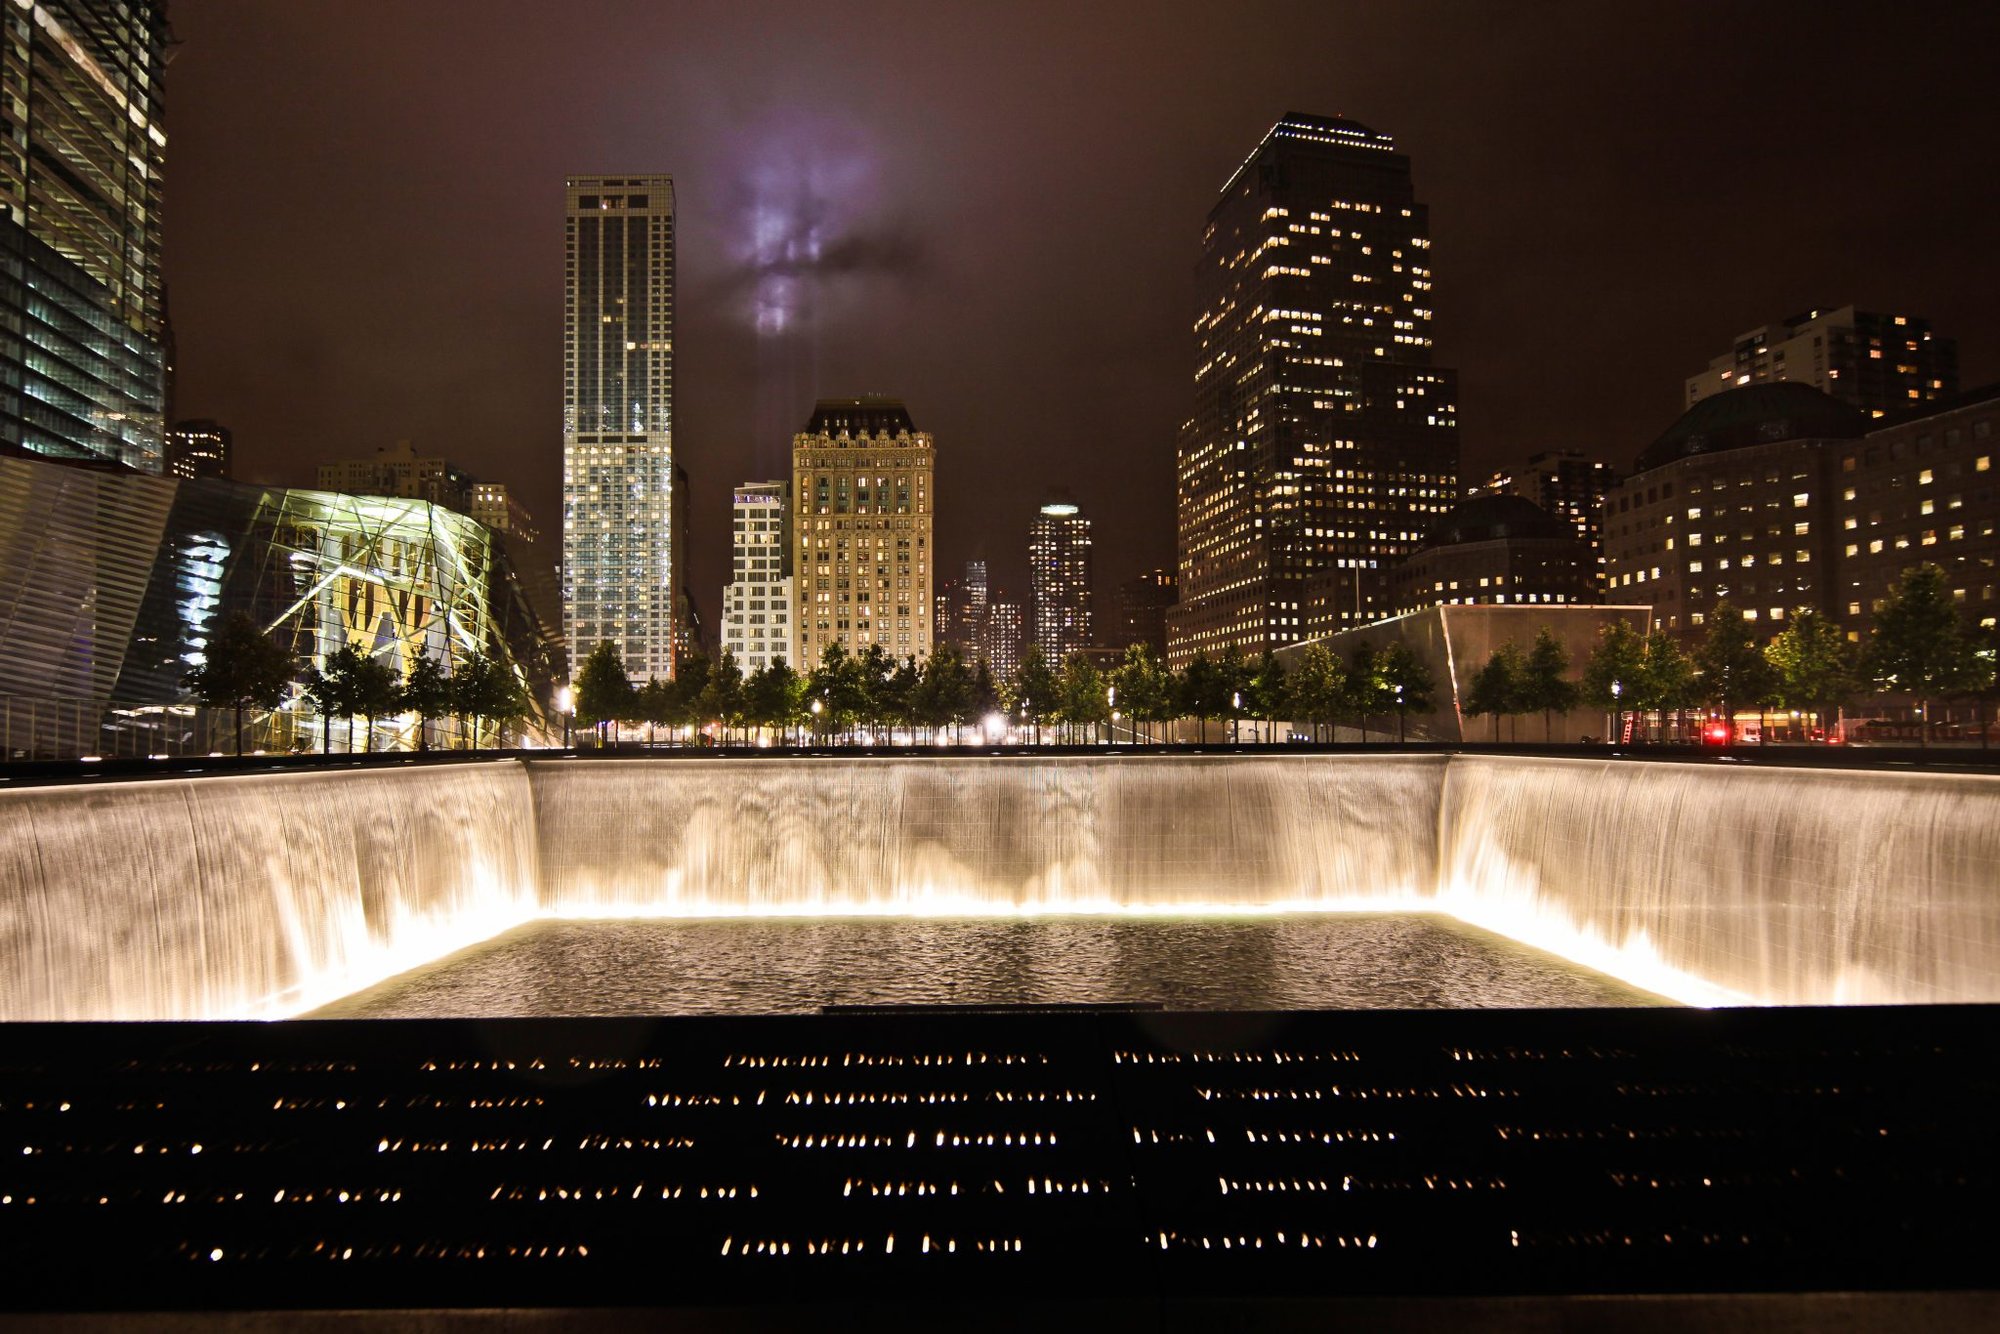 9/11 Memorial and pool at night. Photo by Joe Woolhead, courtesy of the 9/11 Memorial.